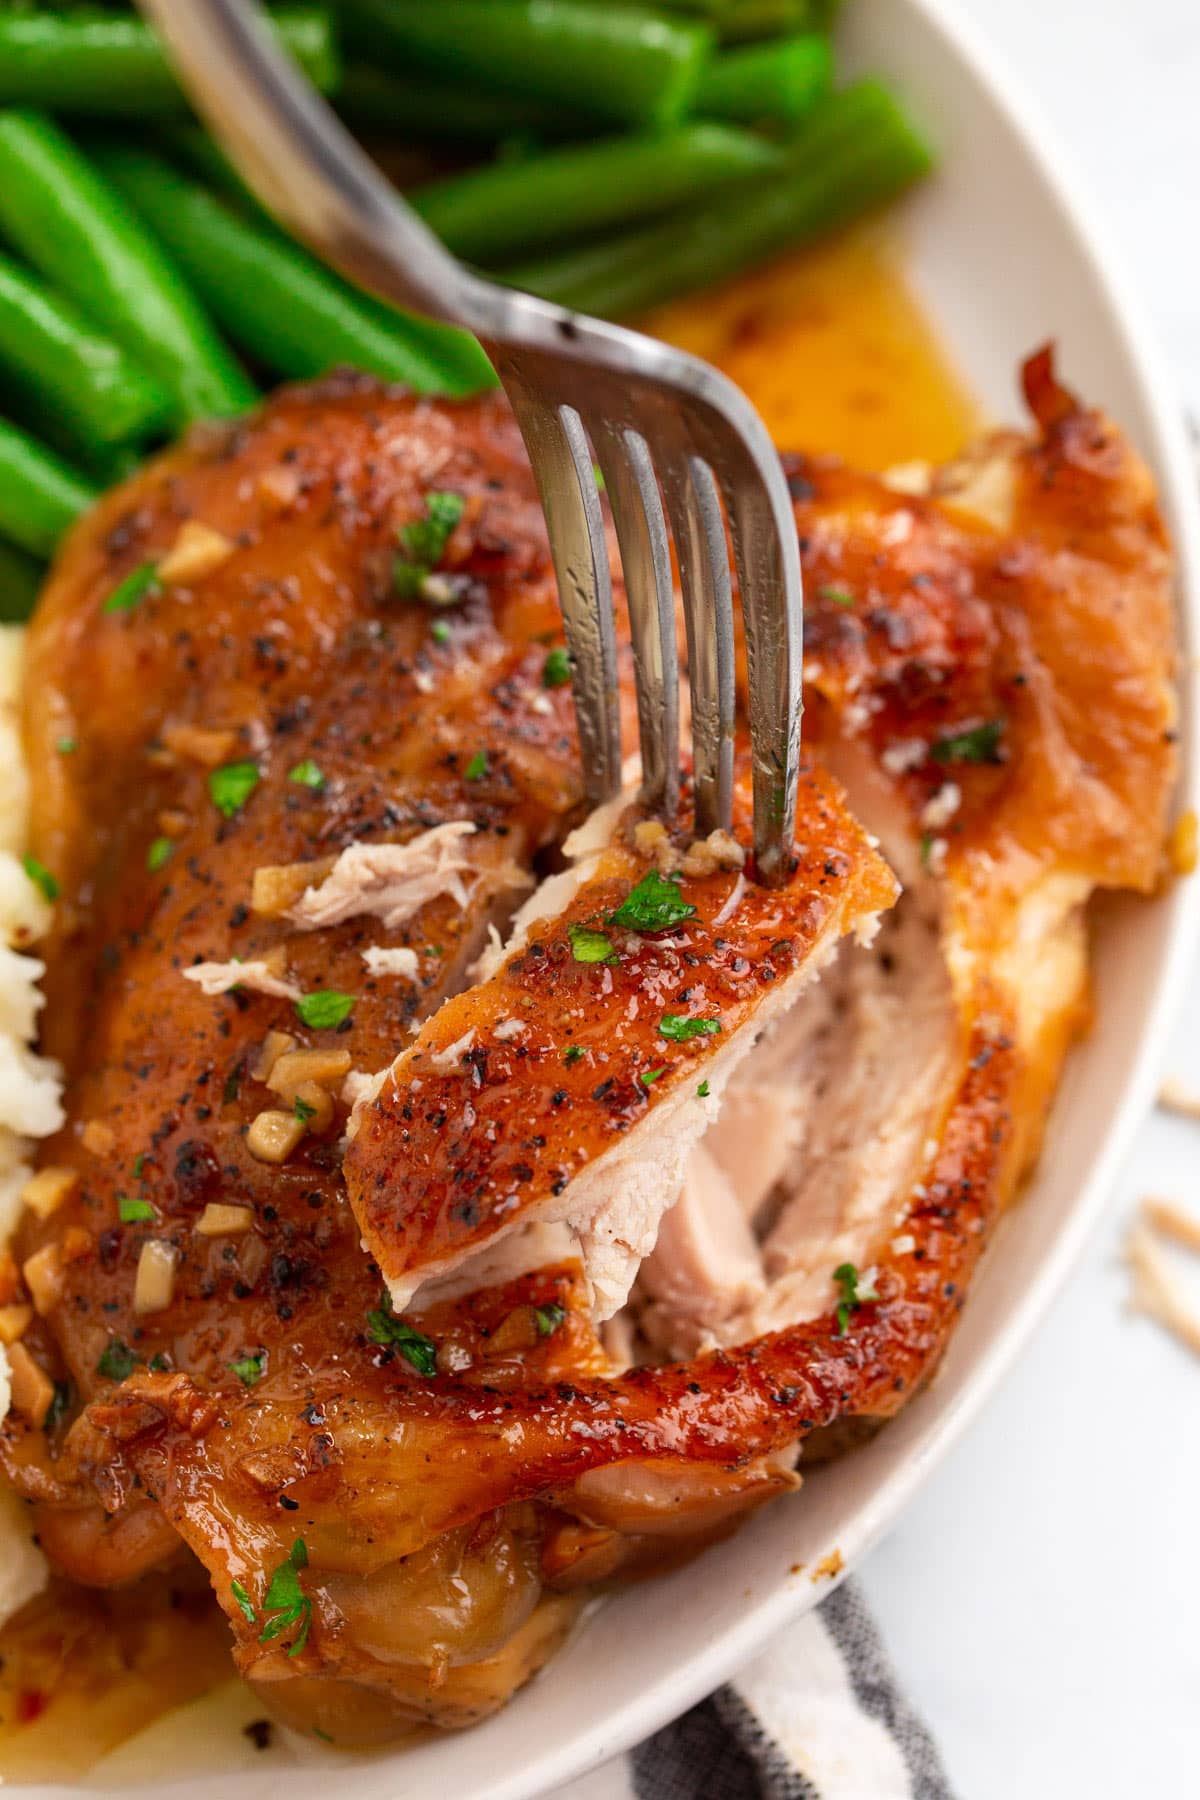 A bite-sized piece of slow cooker brown sugar galic chicken on a fork.